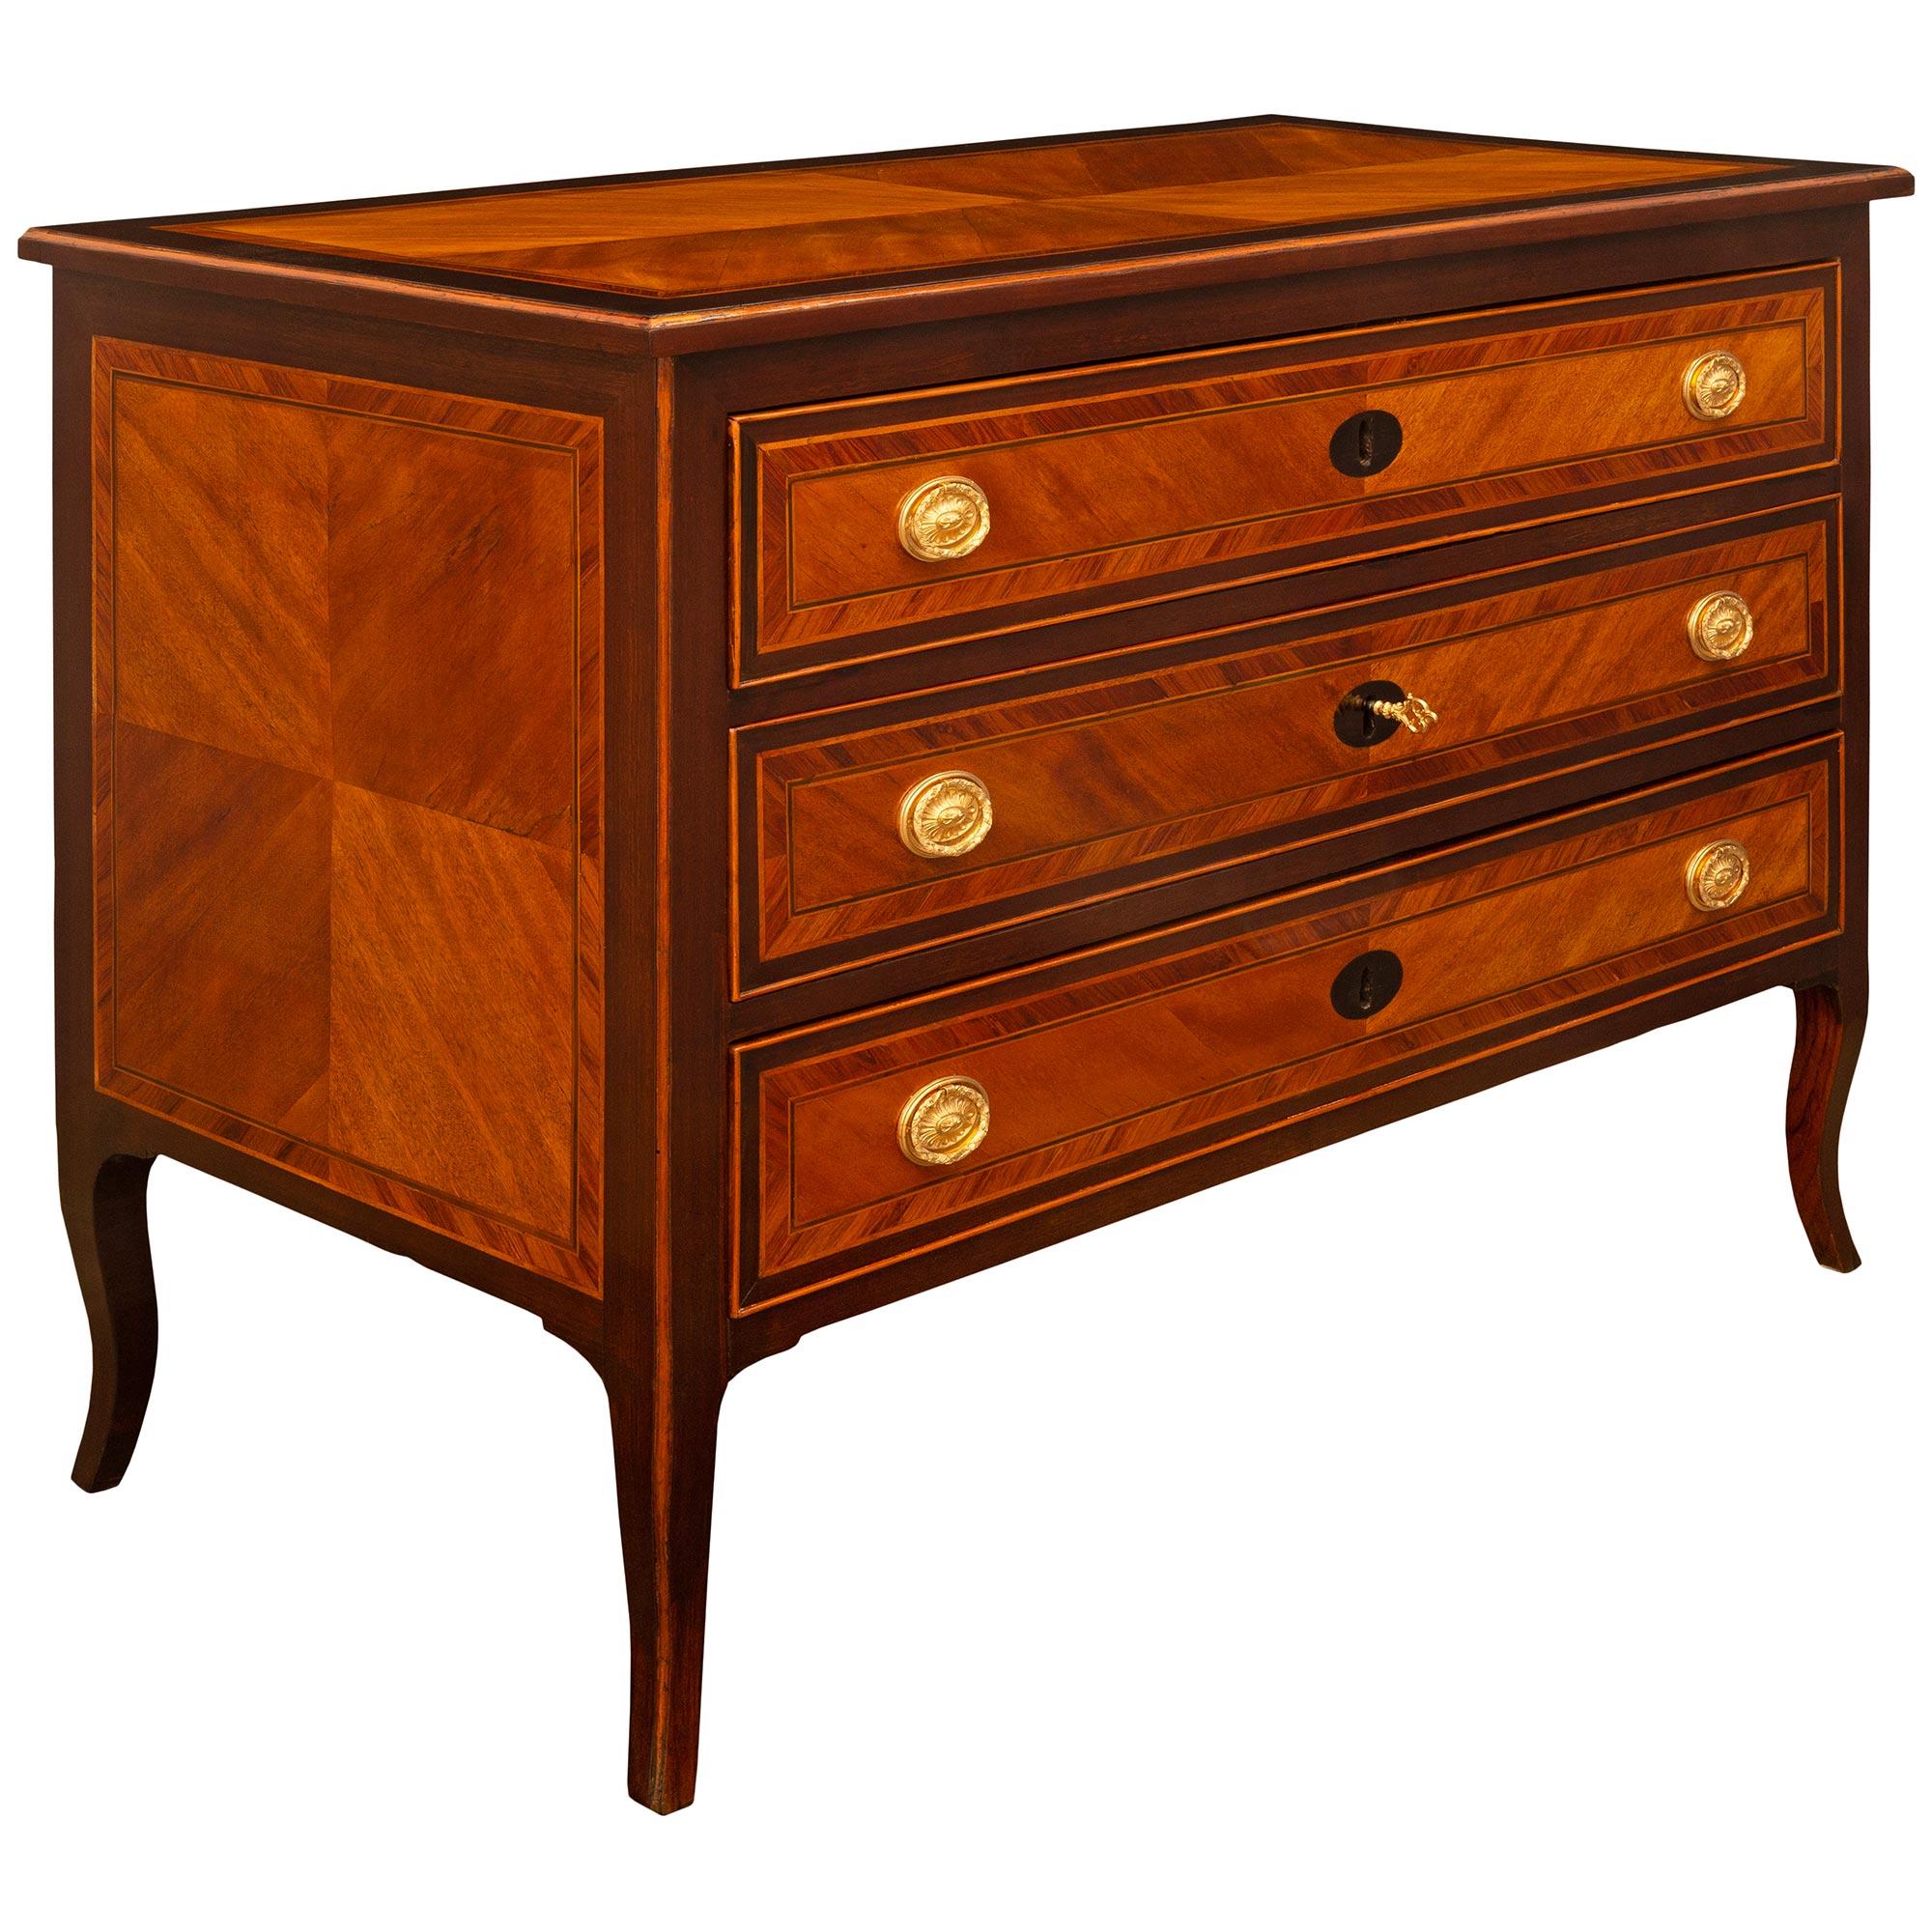 Italian Transitional Period Mahogany, Tulipwood, Cherrywood And Ormolu Commode In Good Condition For Sale In West Palm Beach, FL